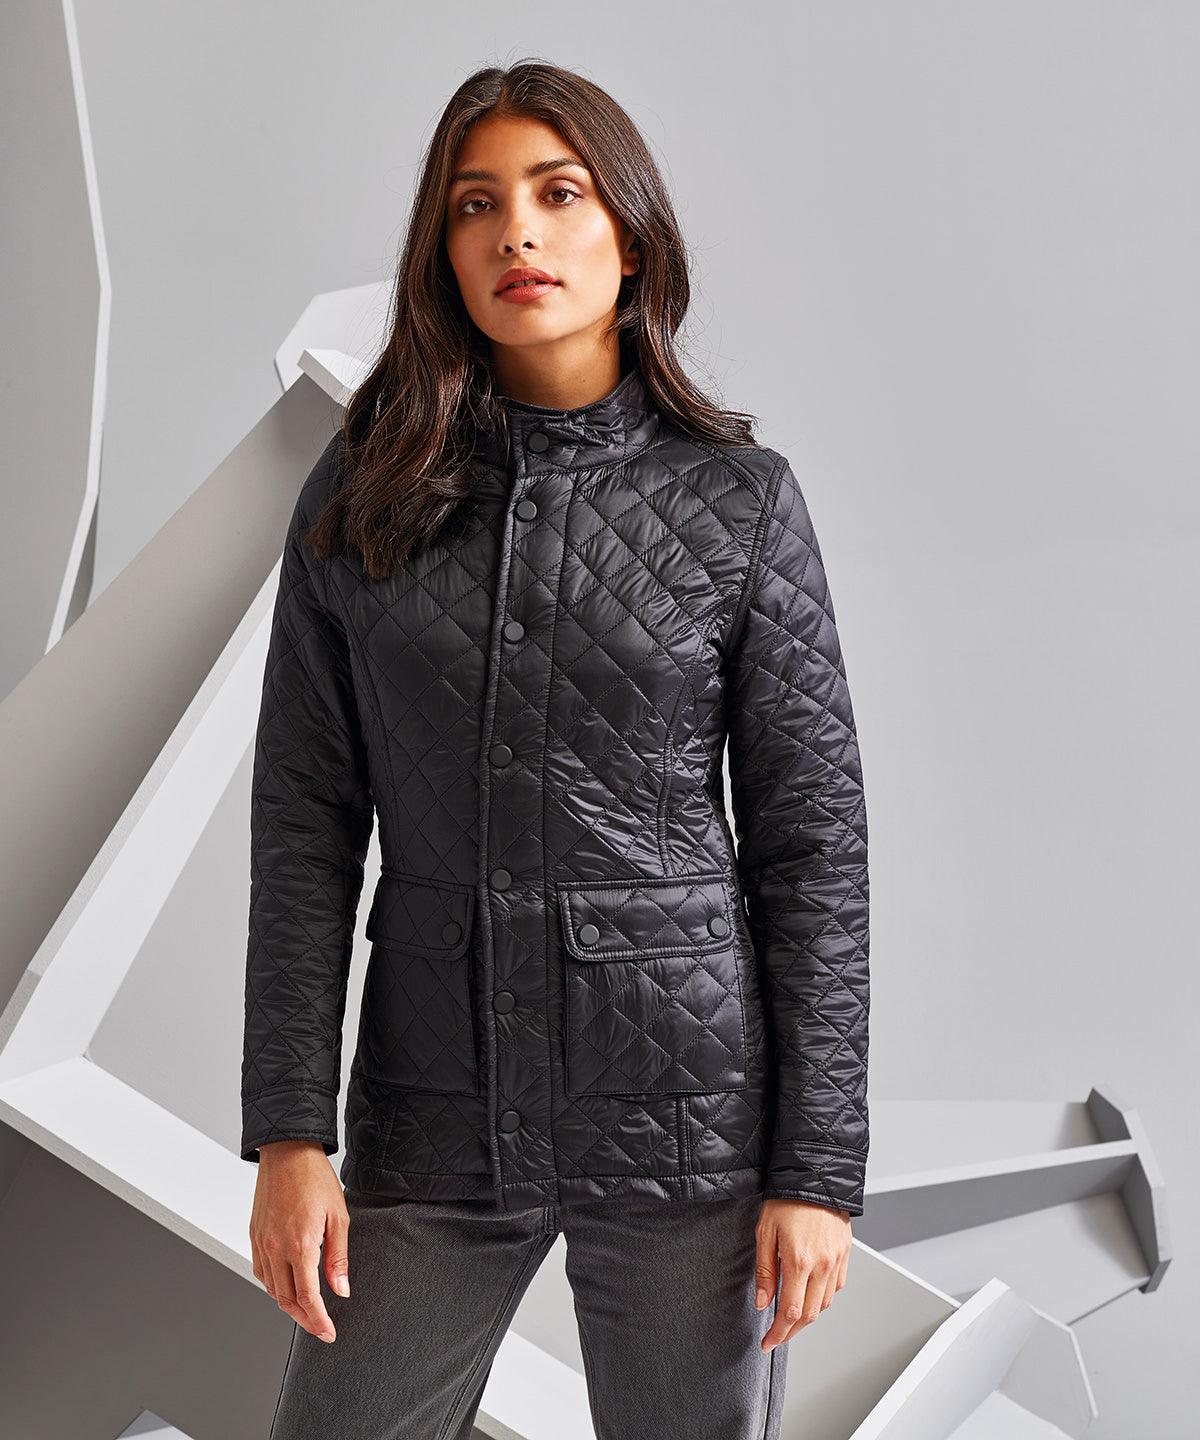 Black - Women's Quartic quilt jacket Jackets 2786 Directory, Jackets & Coats, Padded & Insulation, Padded Perfection, Rebrandable Schoolwear Centres